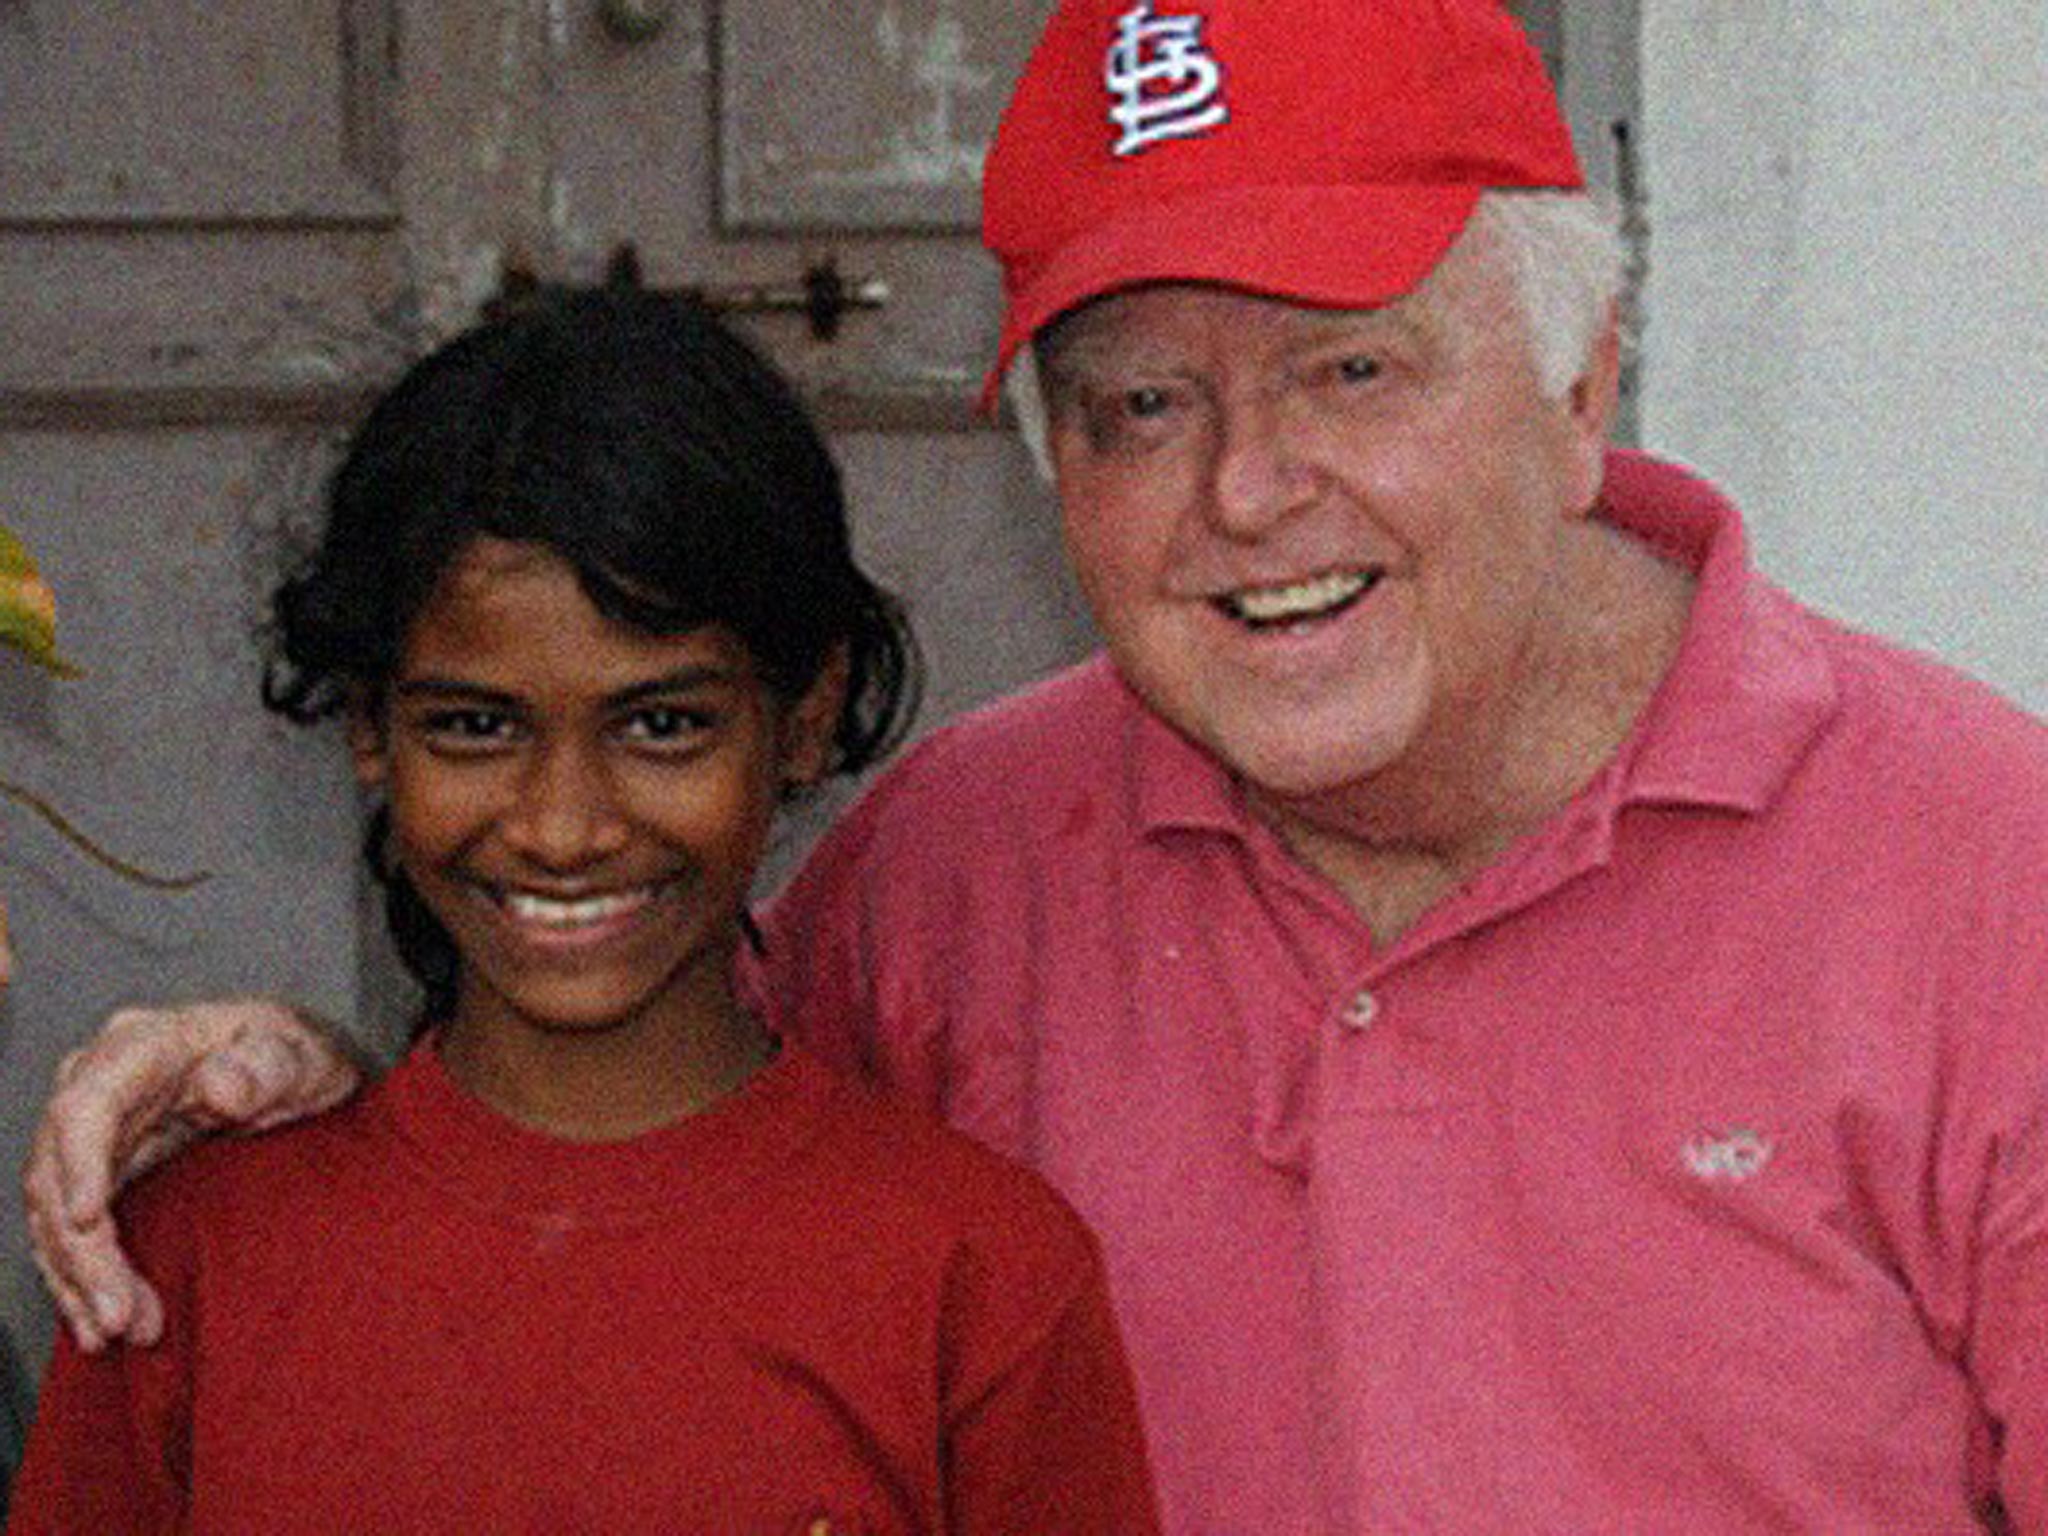 Banana drama: William Sheffield with one of the orphans in India who has benefited from his invention’s success